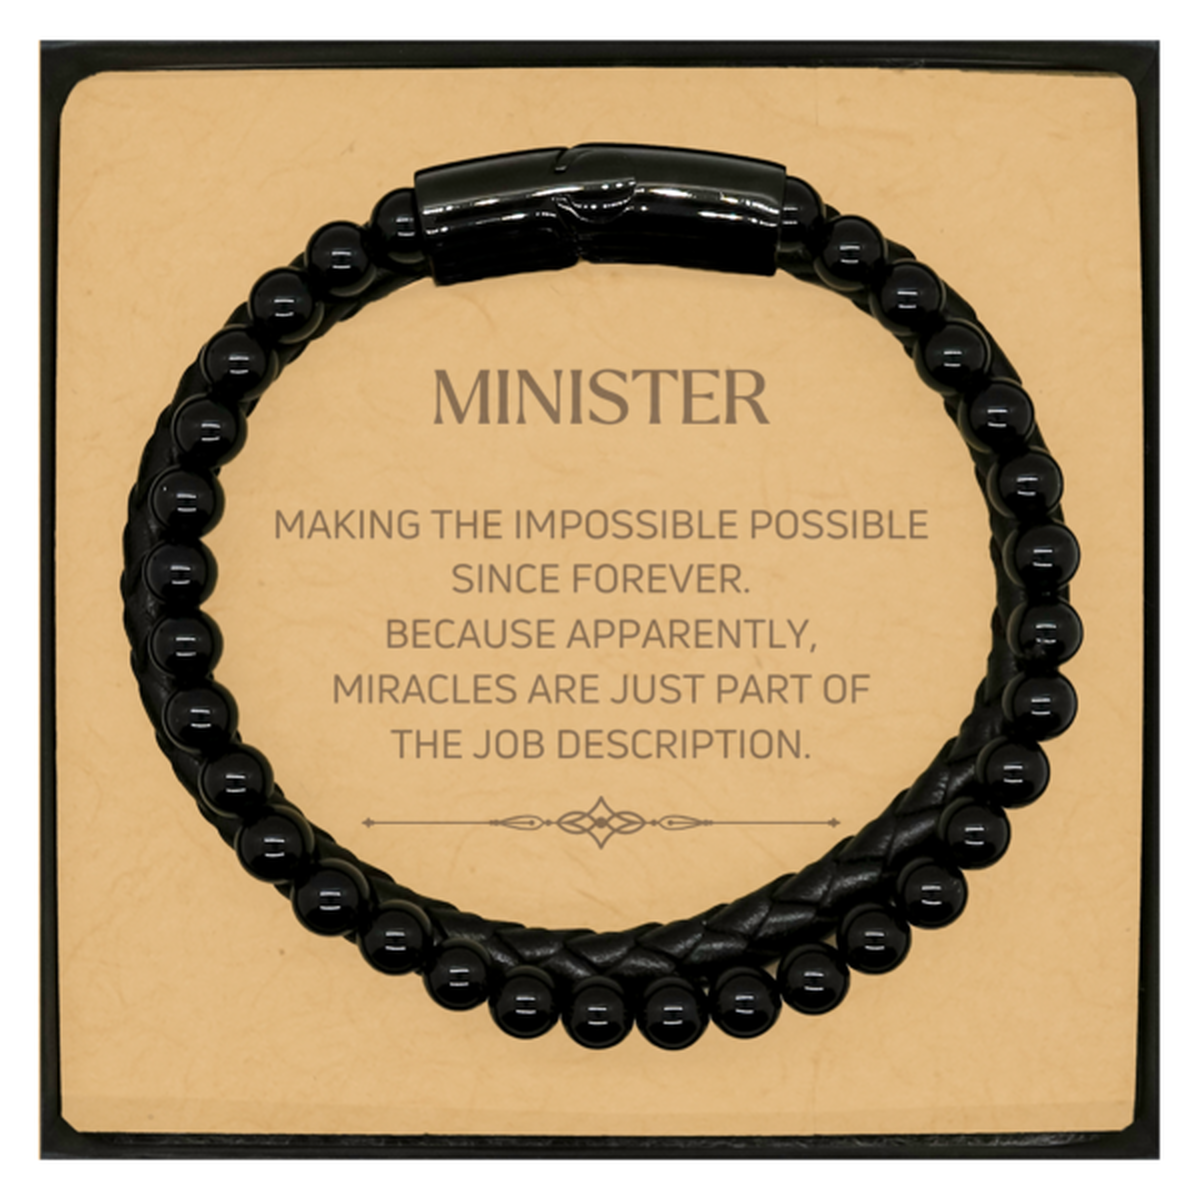 Funny Minister Gifts, Miracles are just part of the job description, Inspirational Birthday Christmas Stone Leather Bracelets For Minister, Men, Women, Coworkers, Friends, Boss